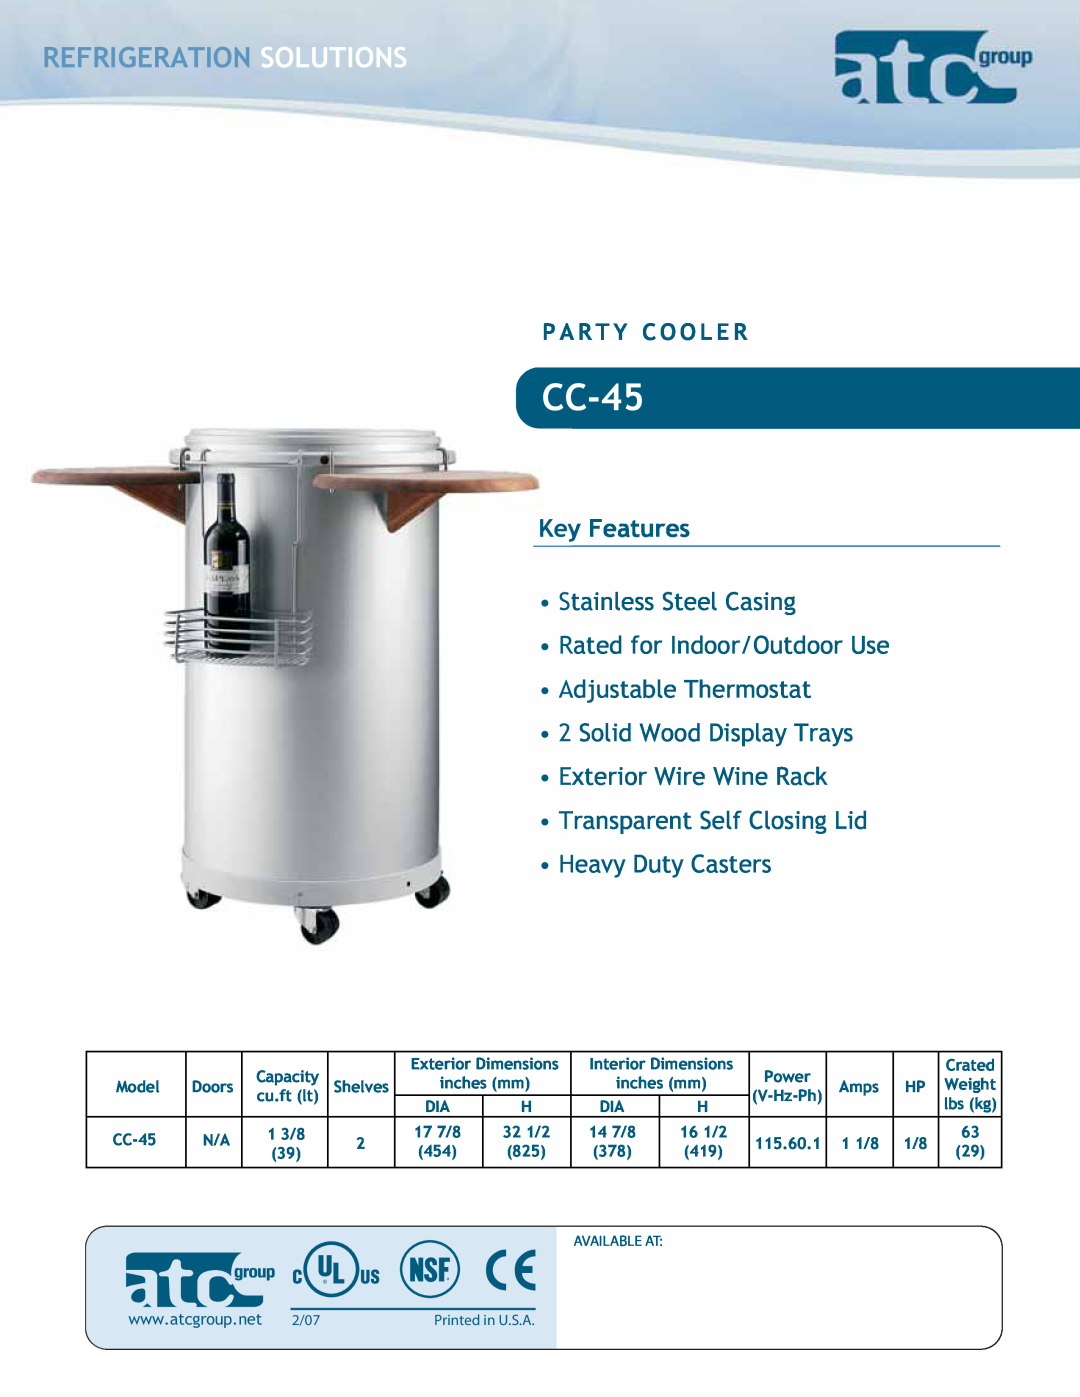 ATC Group CC-45 dimensions Refrigeration Solutions, Key Features, Stainless Steel Casing Rated for Indoor/Outdoor Use 